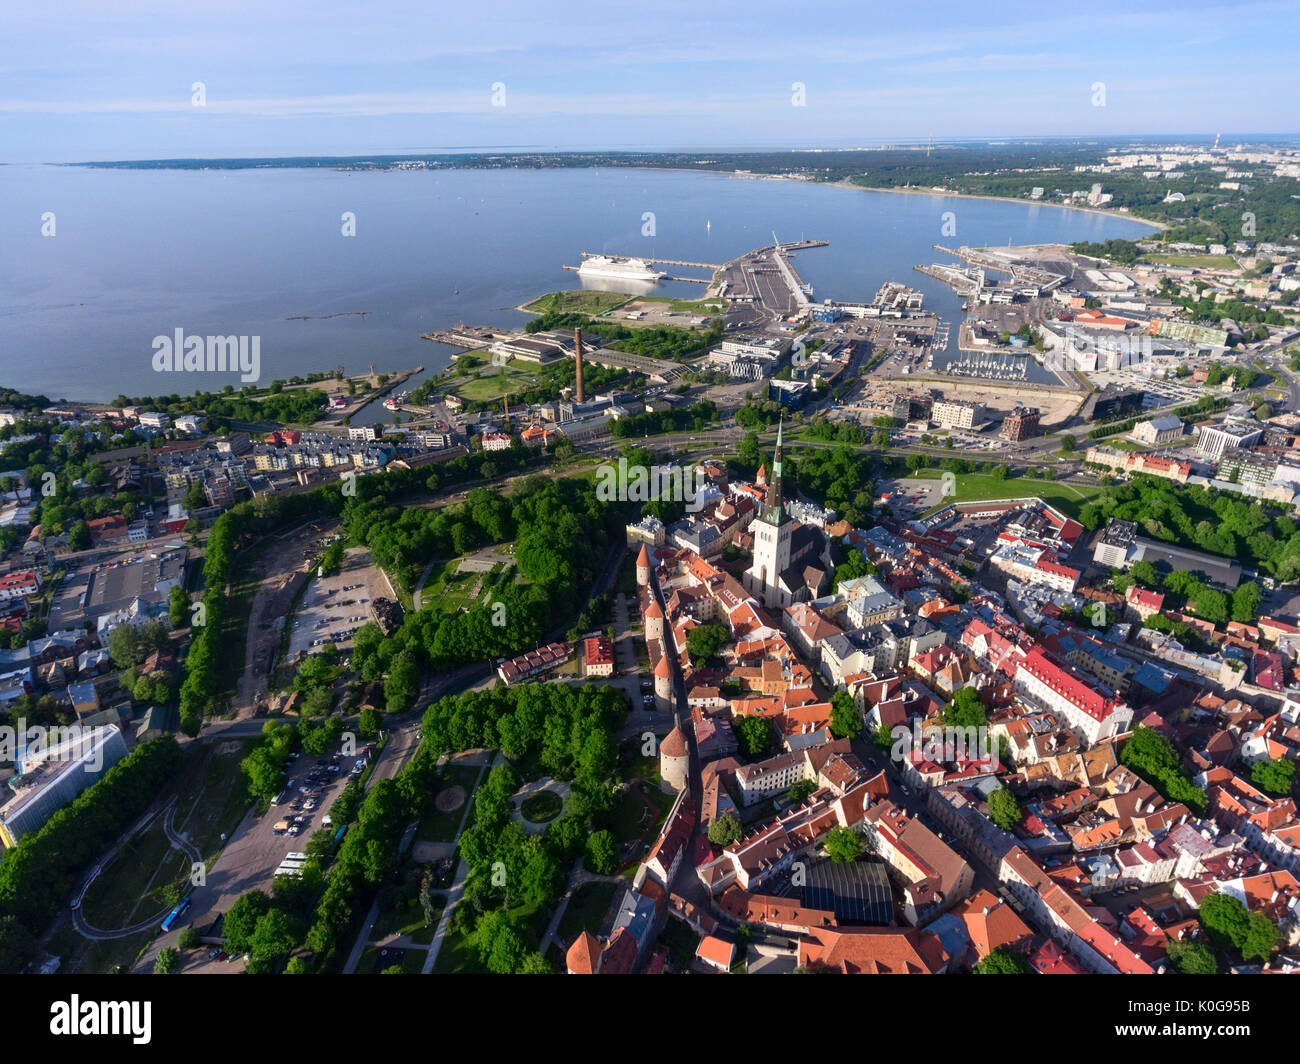 Panorama of Tallinn city with Old town, port in Gulf of Finland and urban modern buildings. Aerial view Stock Photo